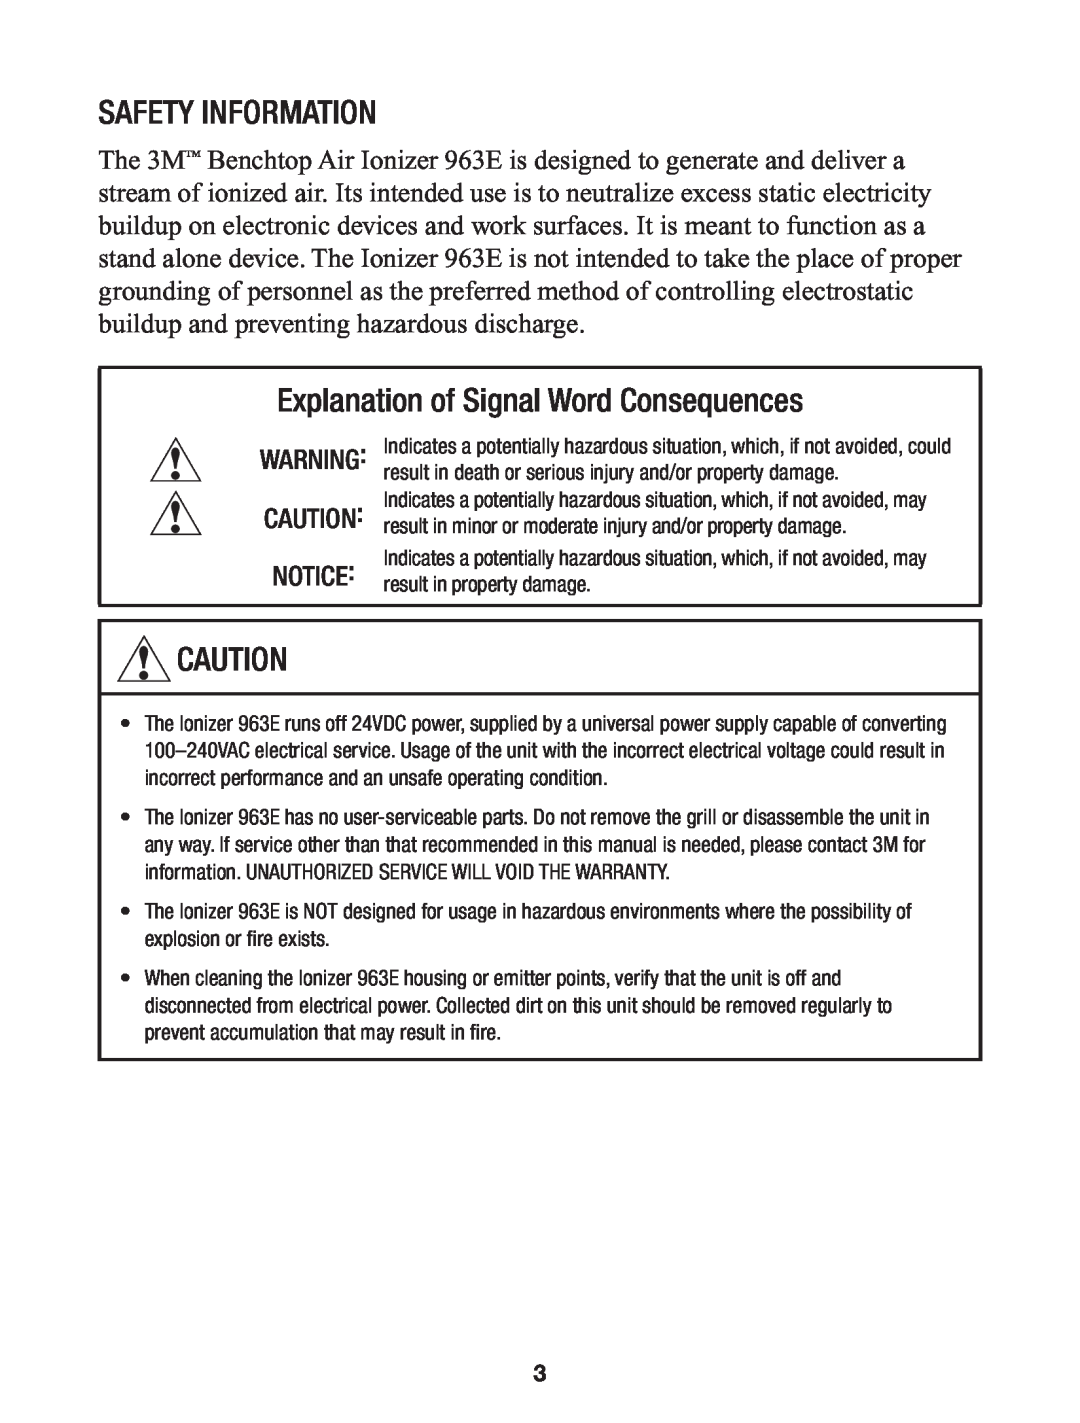 3M 963E manual Safety Information, Explanation of Signal Word Consequences 